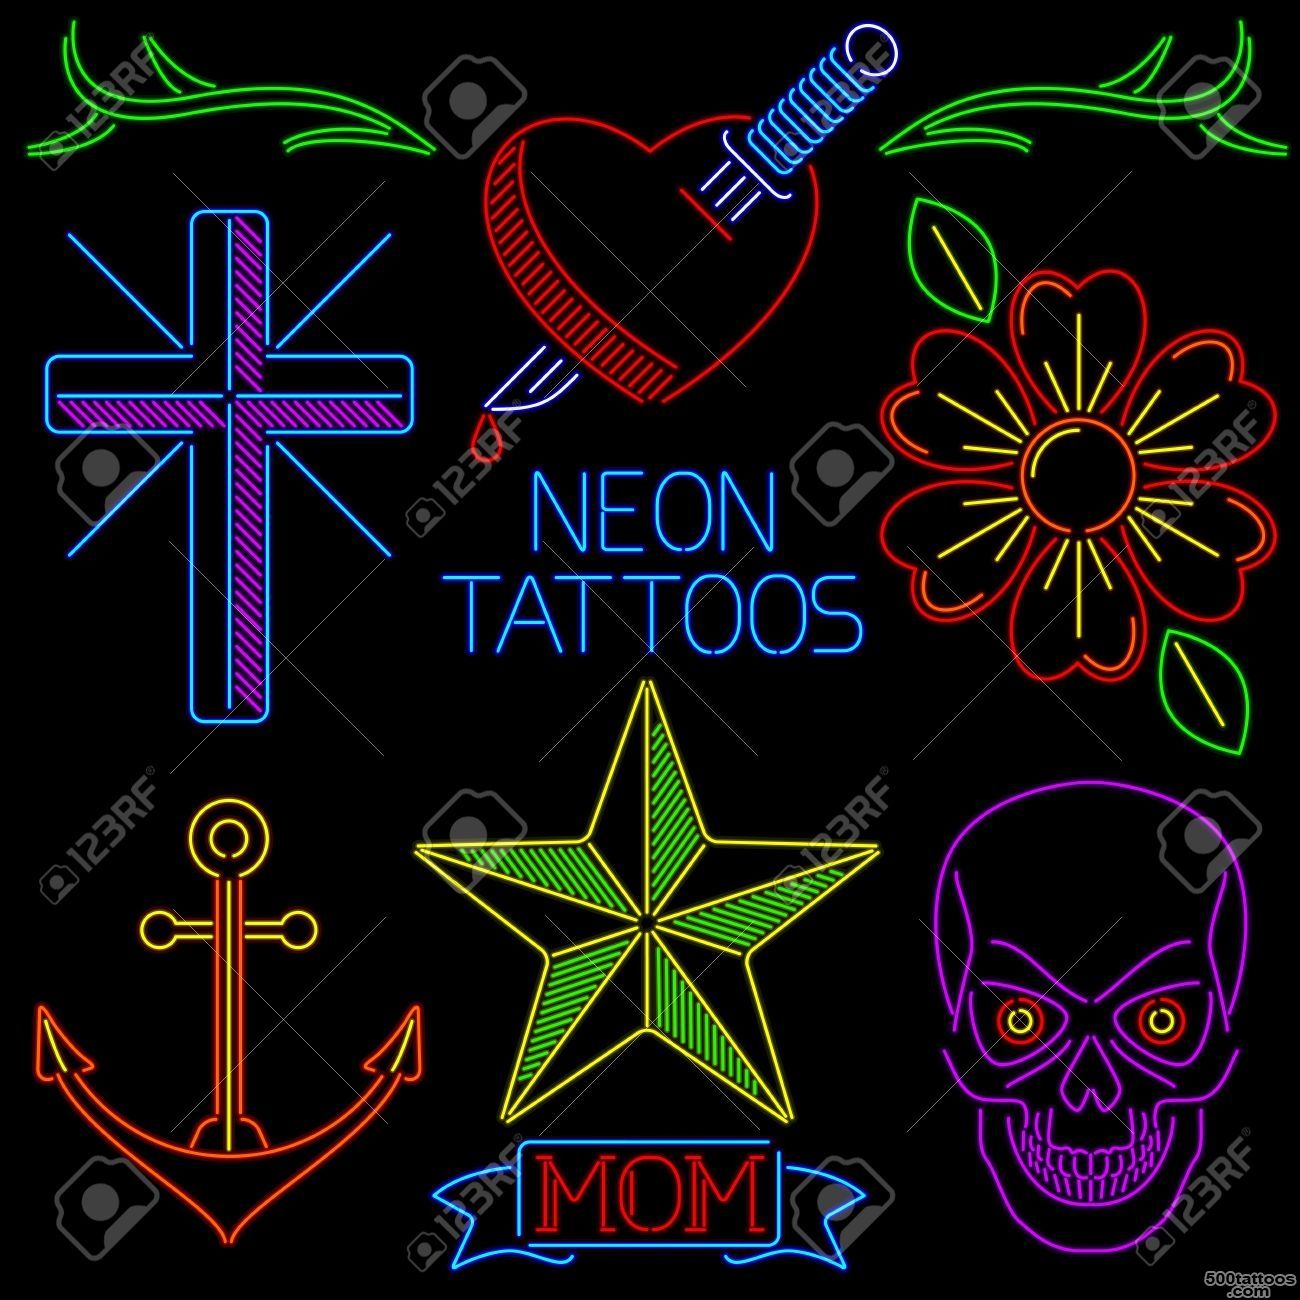 Neon Tattoos Royalty Free Cliparts, Vectors, And Stock ..._20